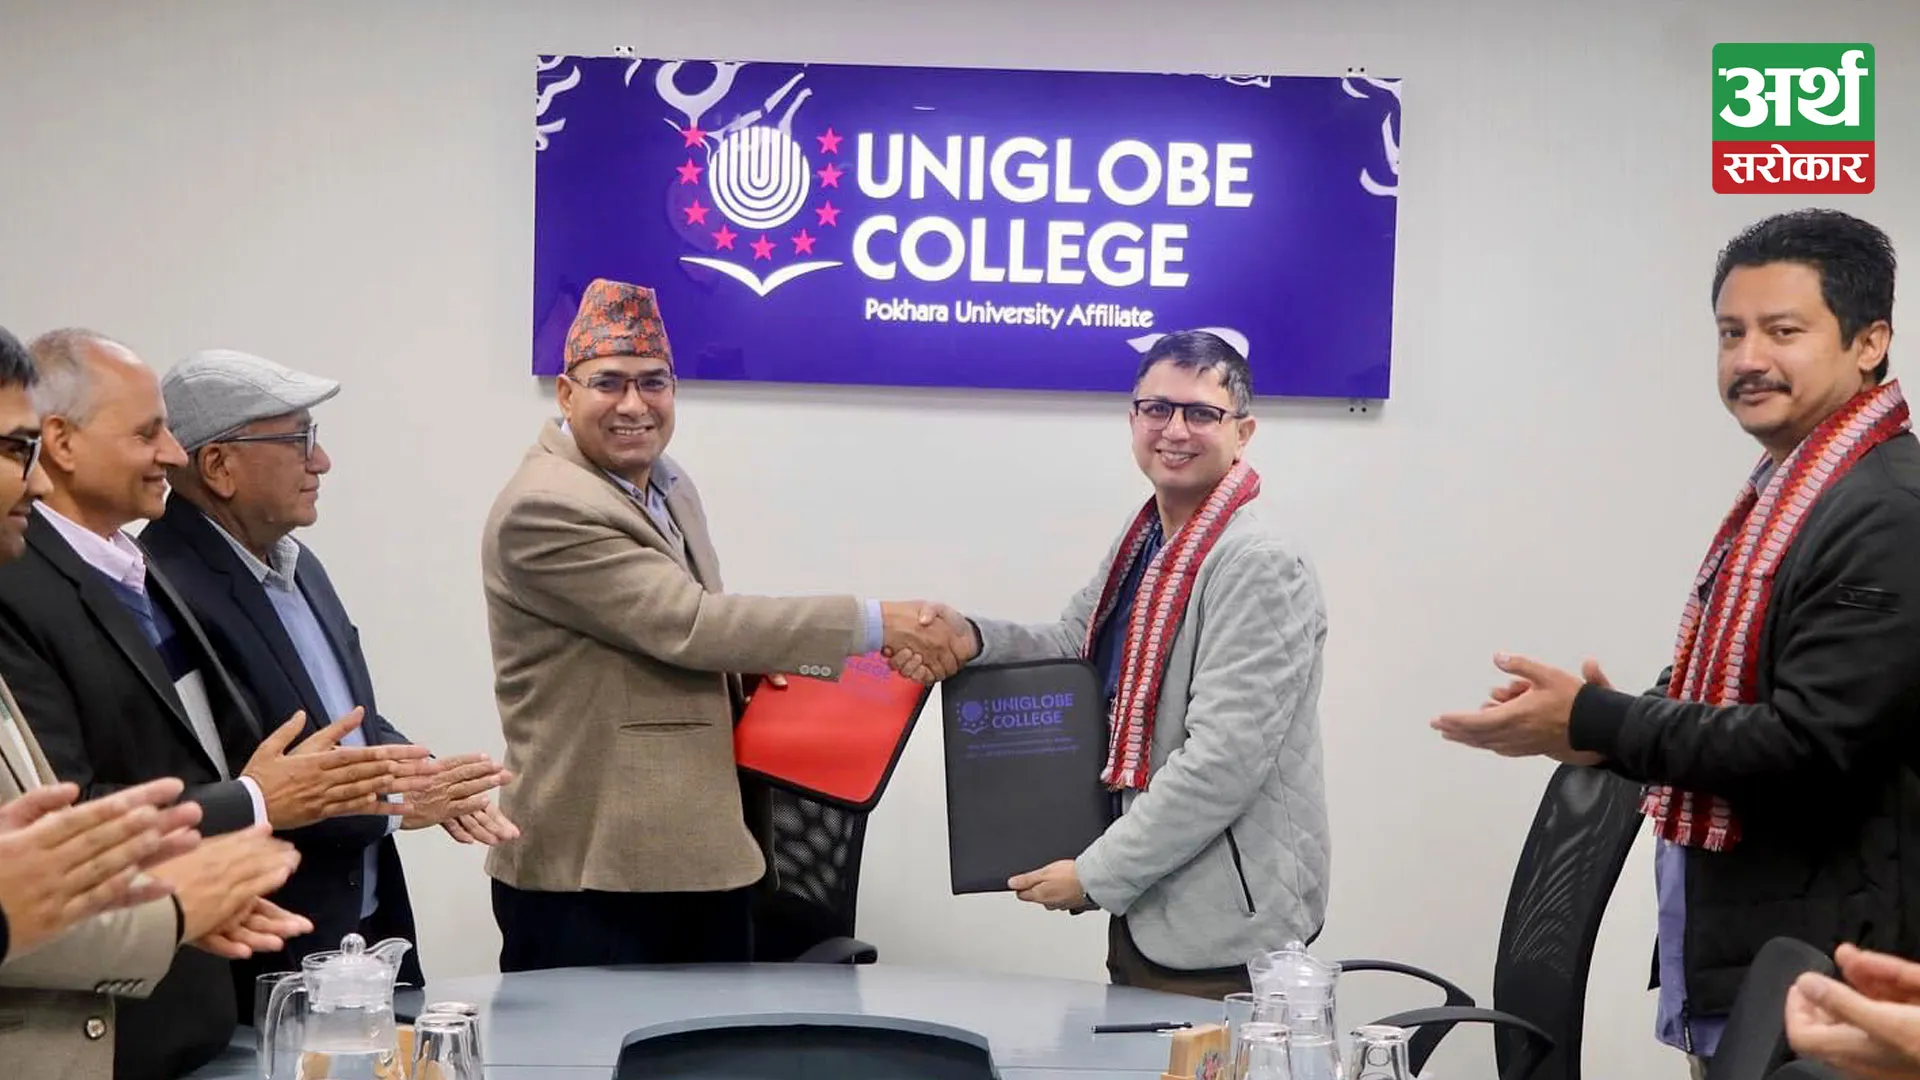 Uniglobe College and Paywell Nepal announce strategic collaboration